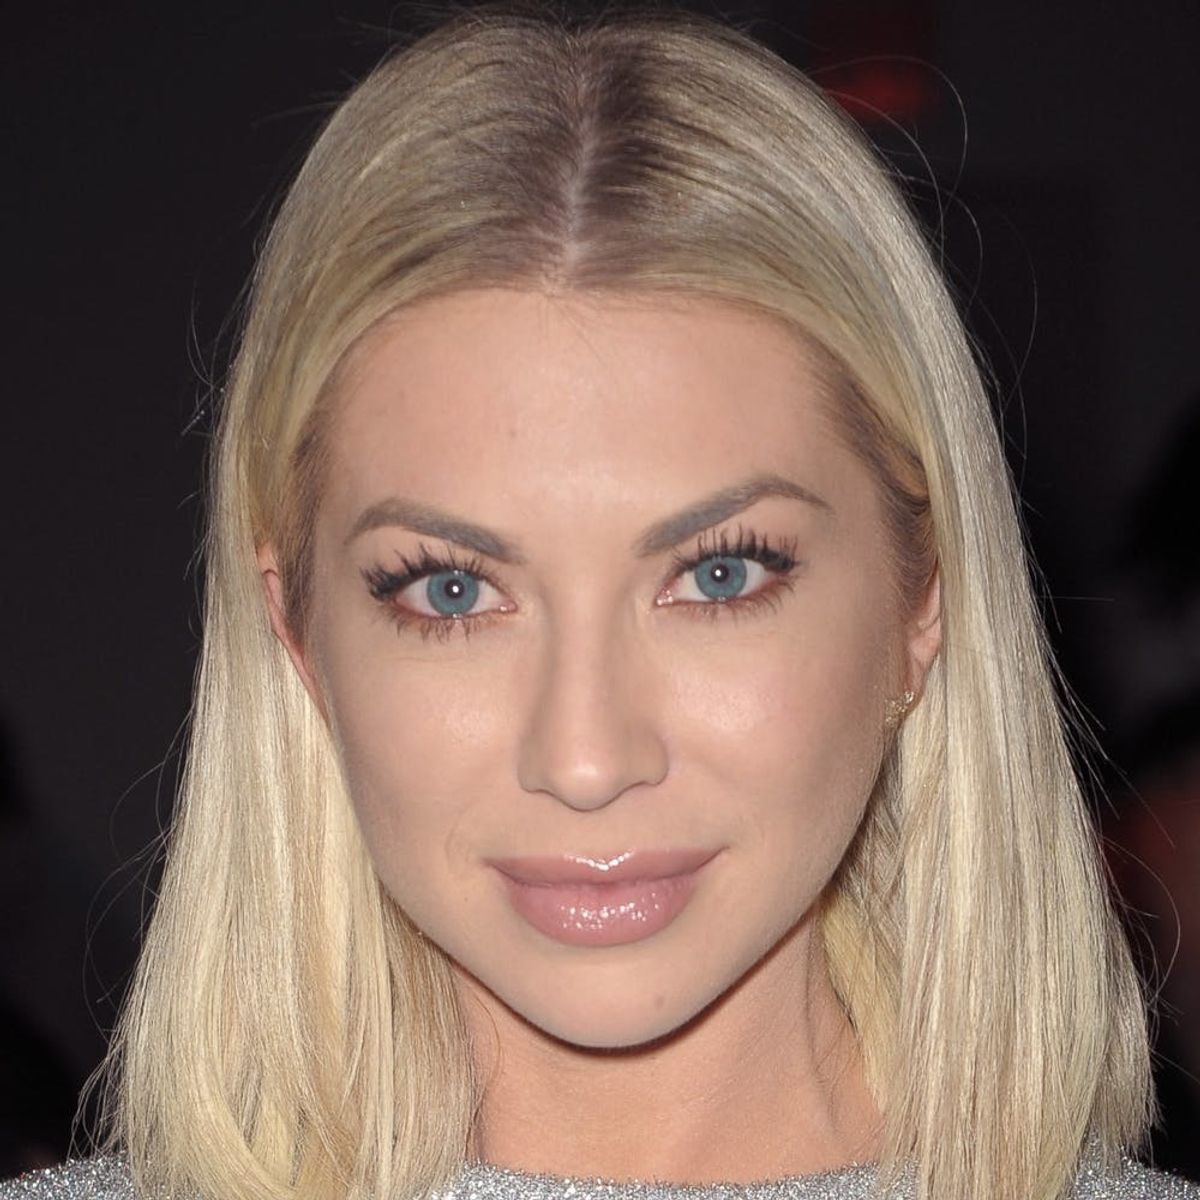 Stassi Schroeder Has a New “Beau” in Her Life and We Know Who He Is